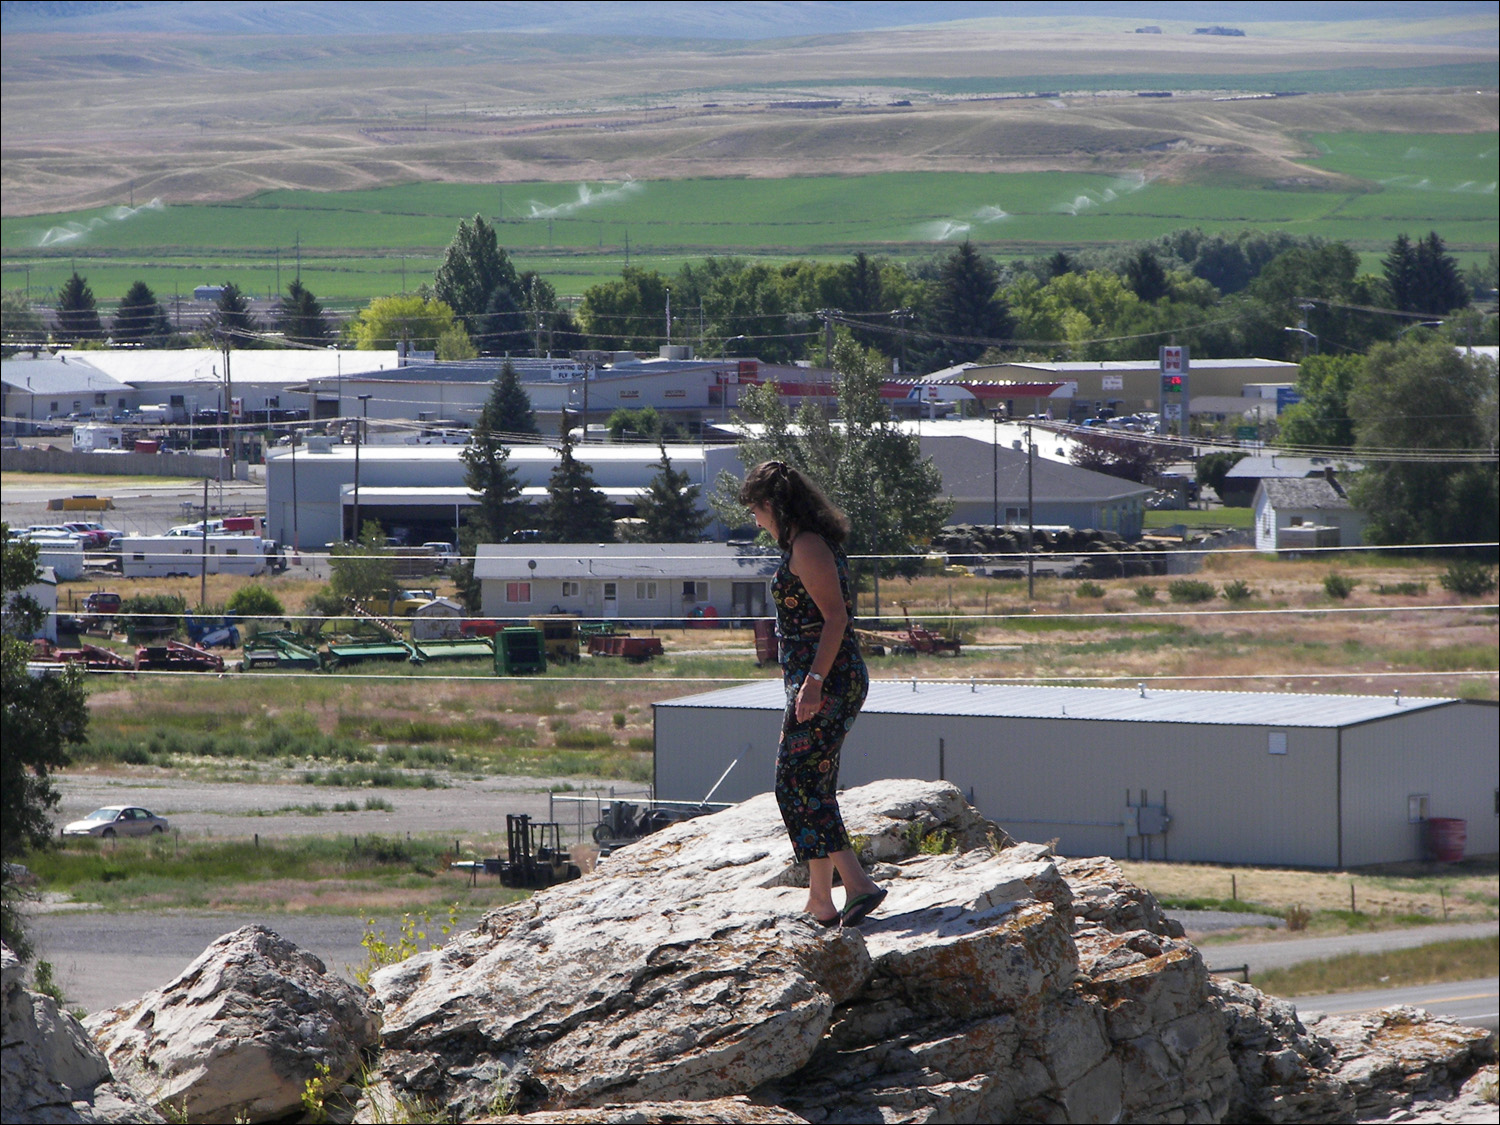 Photos taken at Clark's Lookout in Dillon, MT.